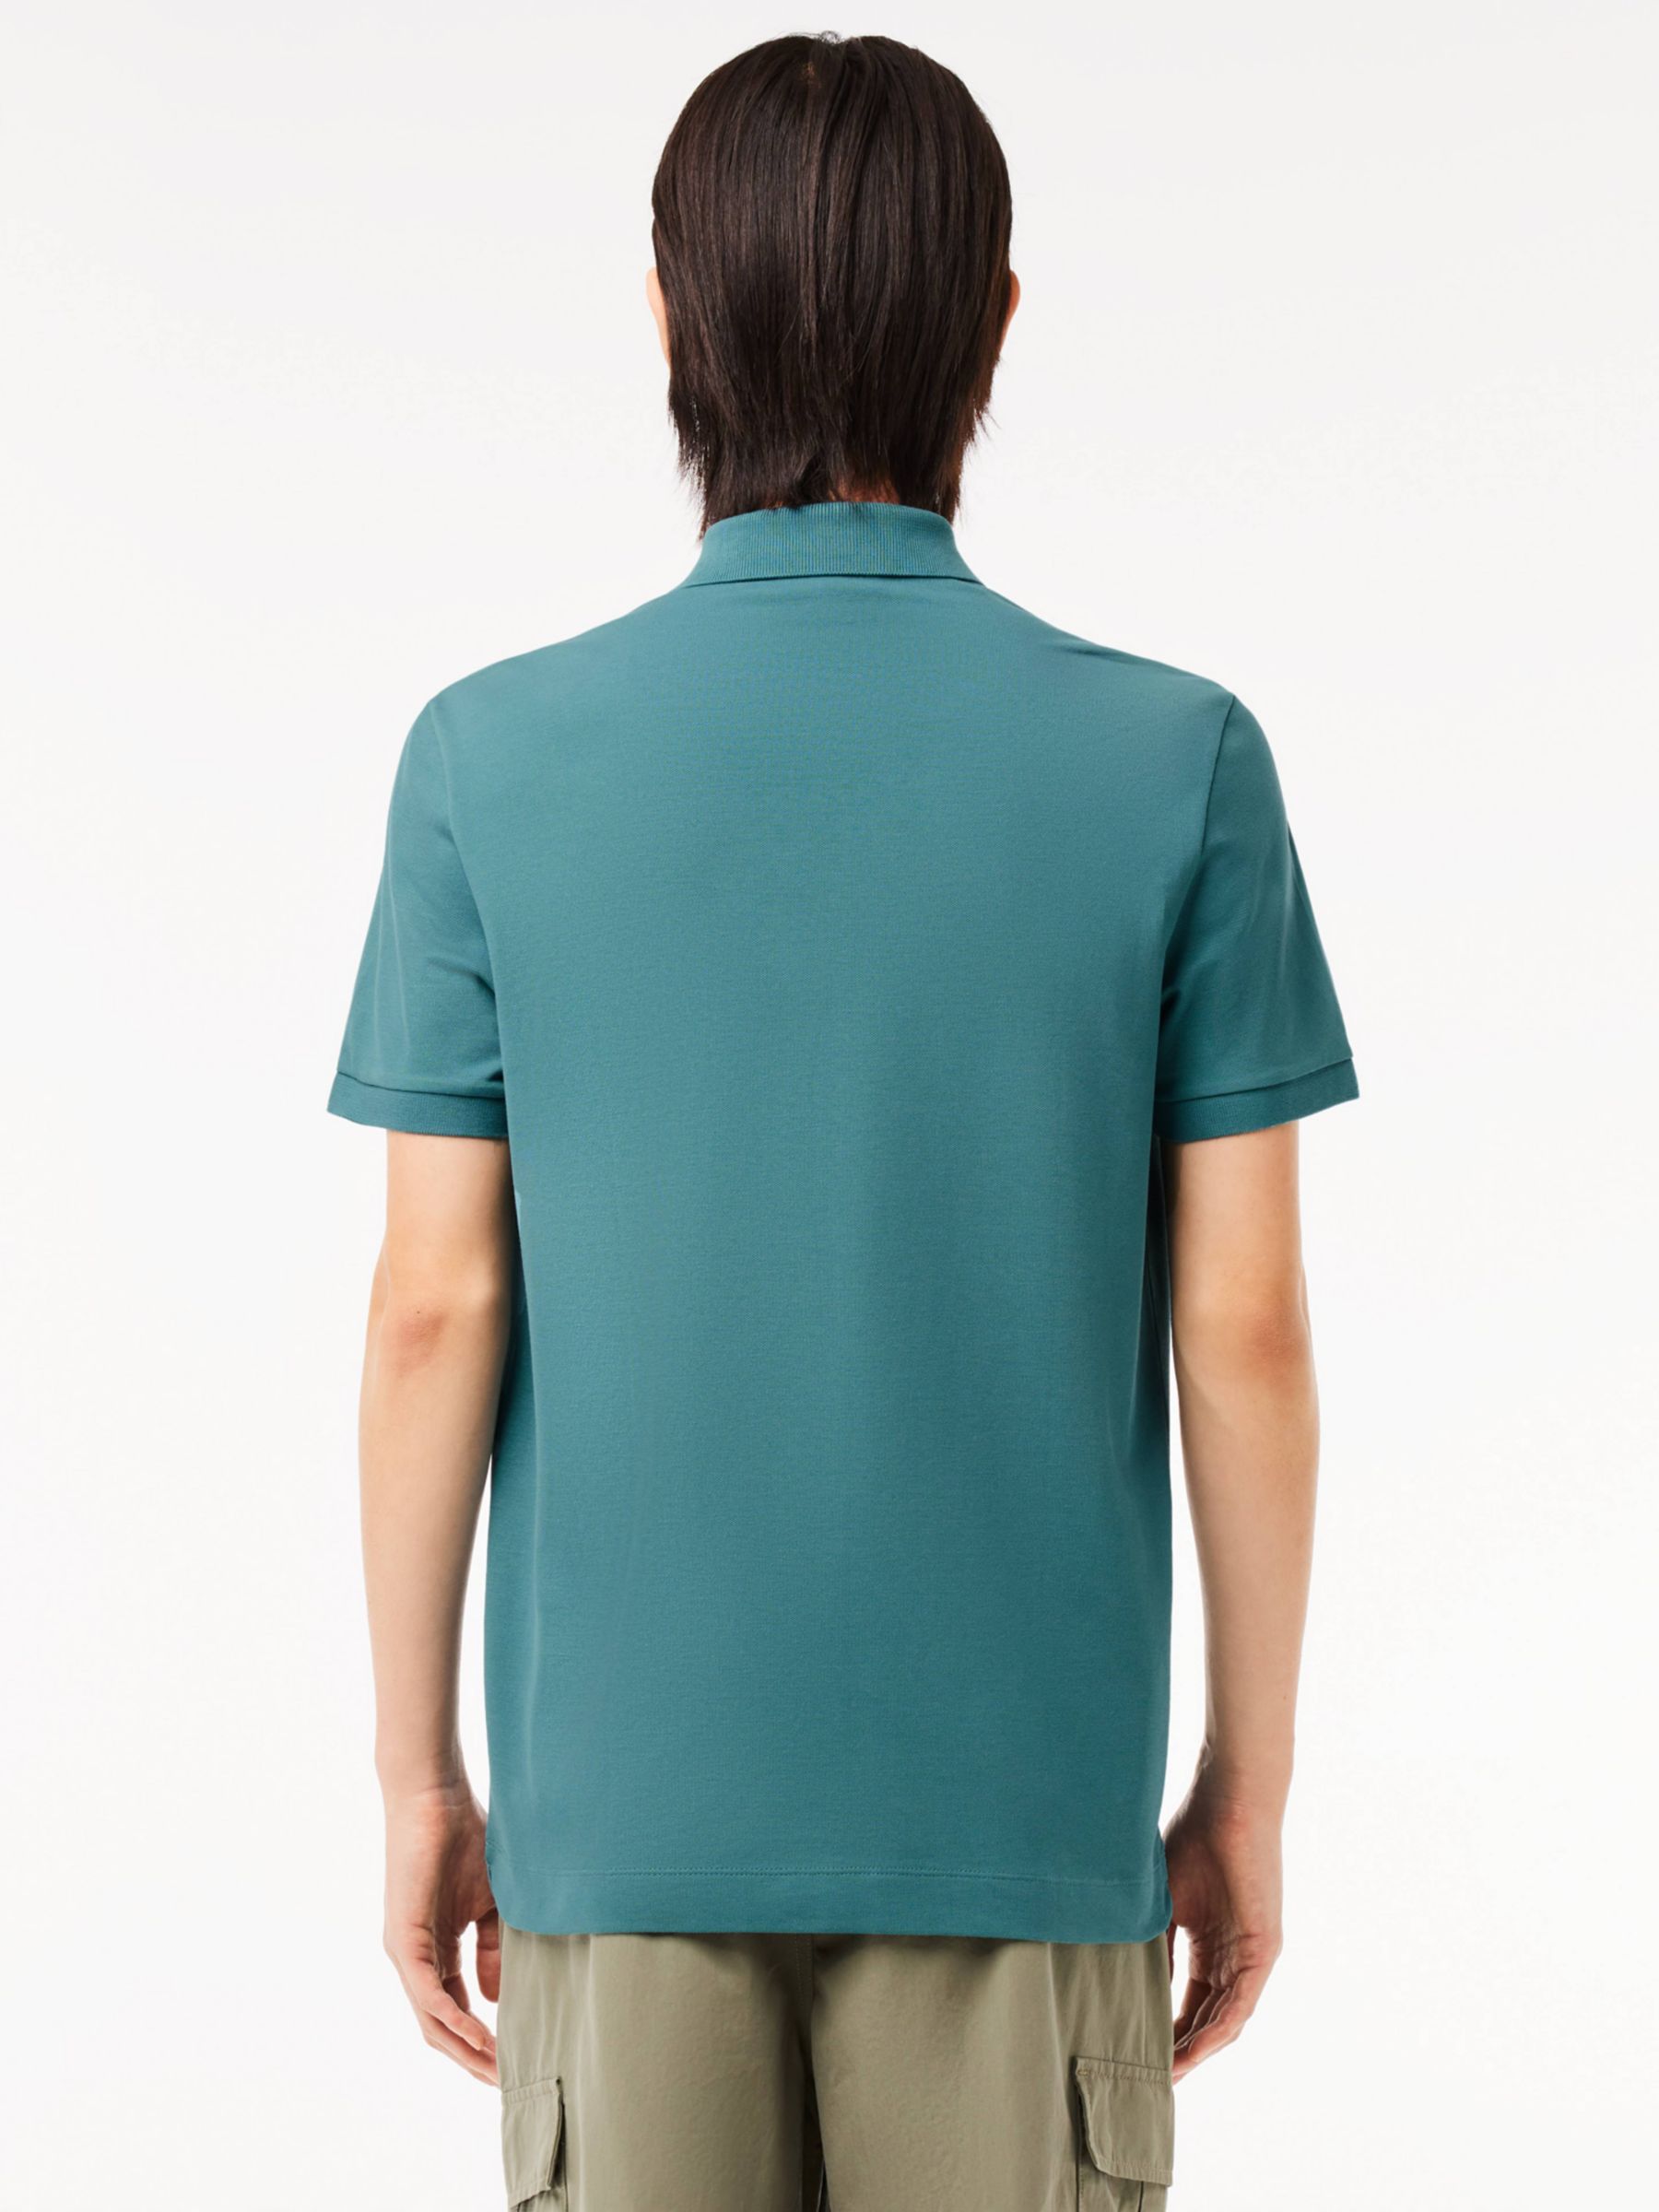 Lacoste Core Essential Polo Shirt, Green, S